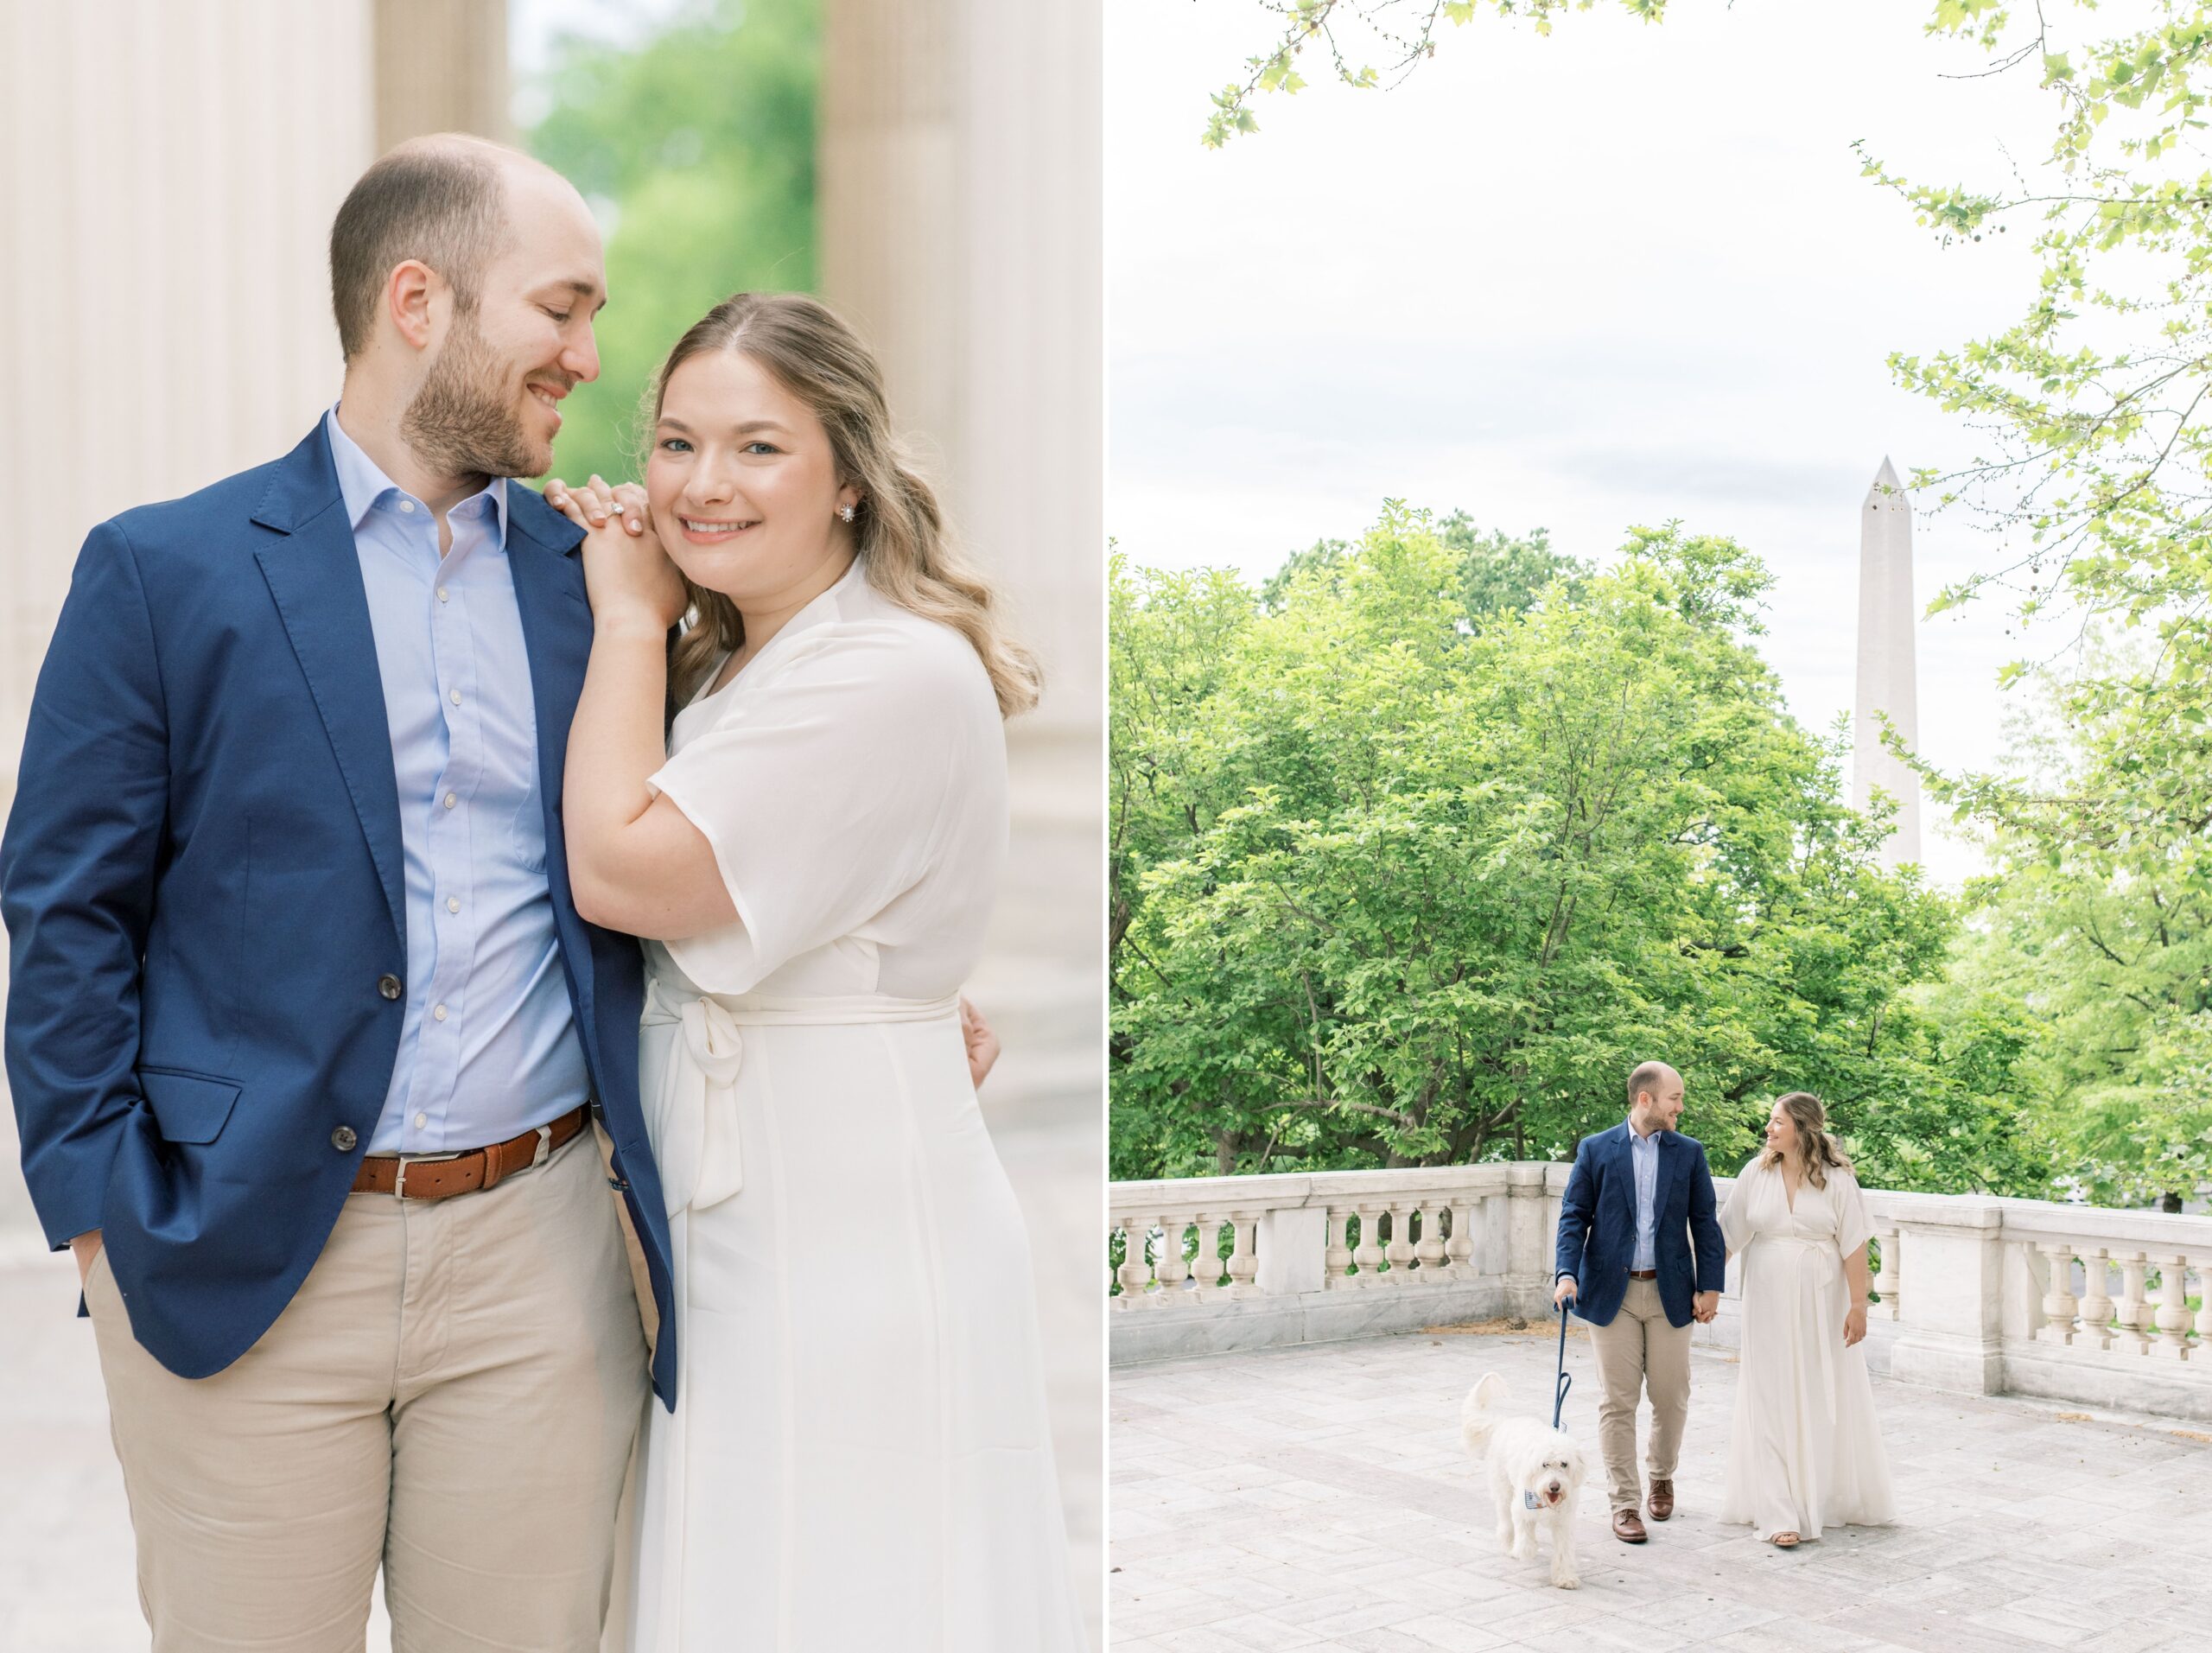 A romantic sunrise engagement session at DAR Constitution Hall and the Constitution Gardens in Washington, DC.